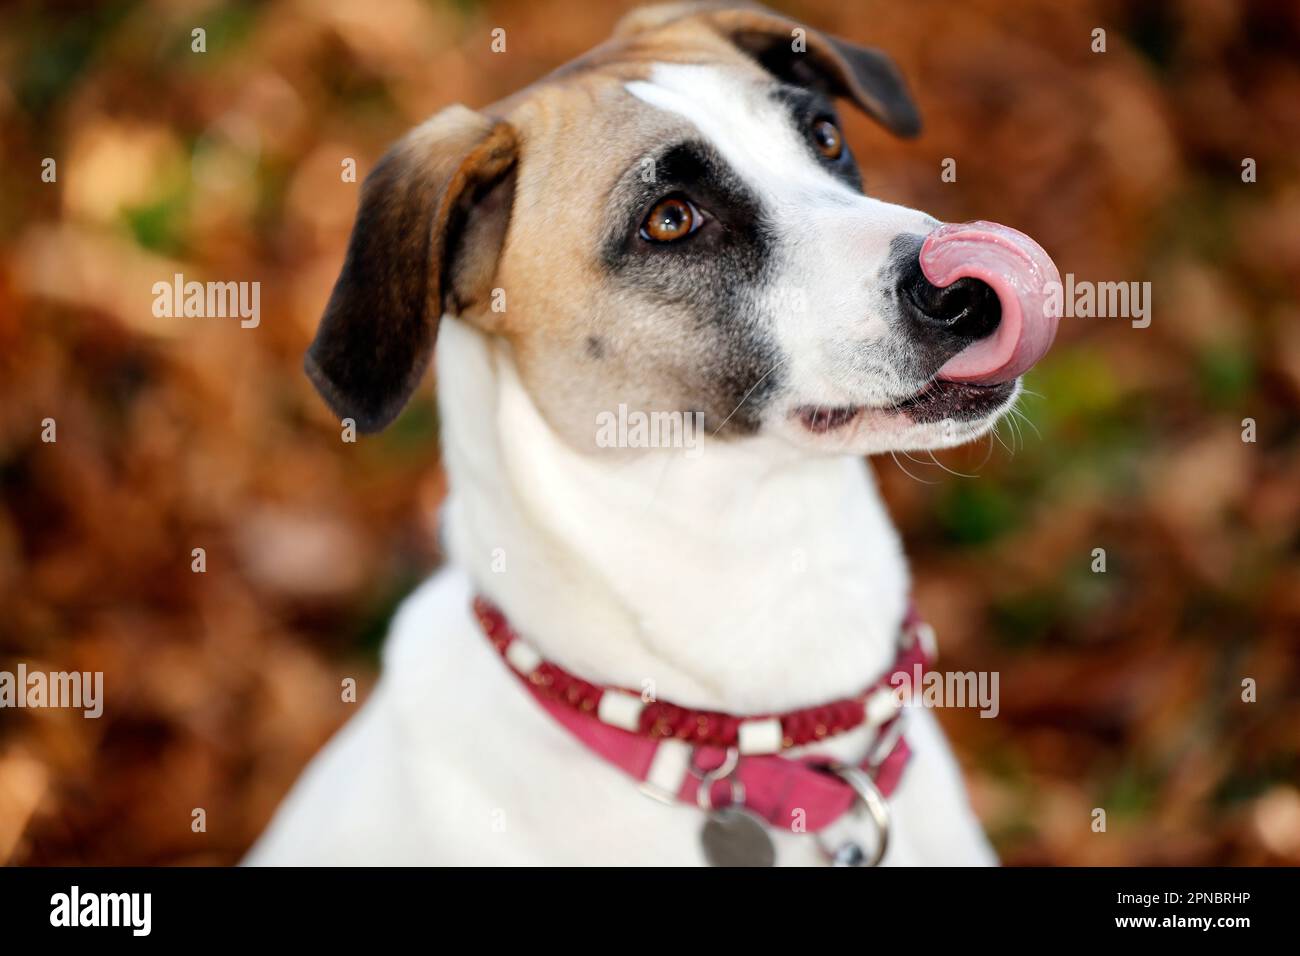 Close up of dog's face.   France. Stock Photo